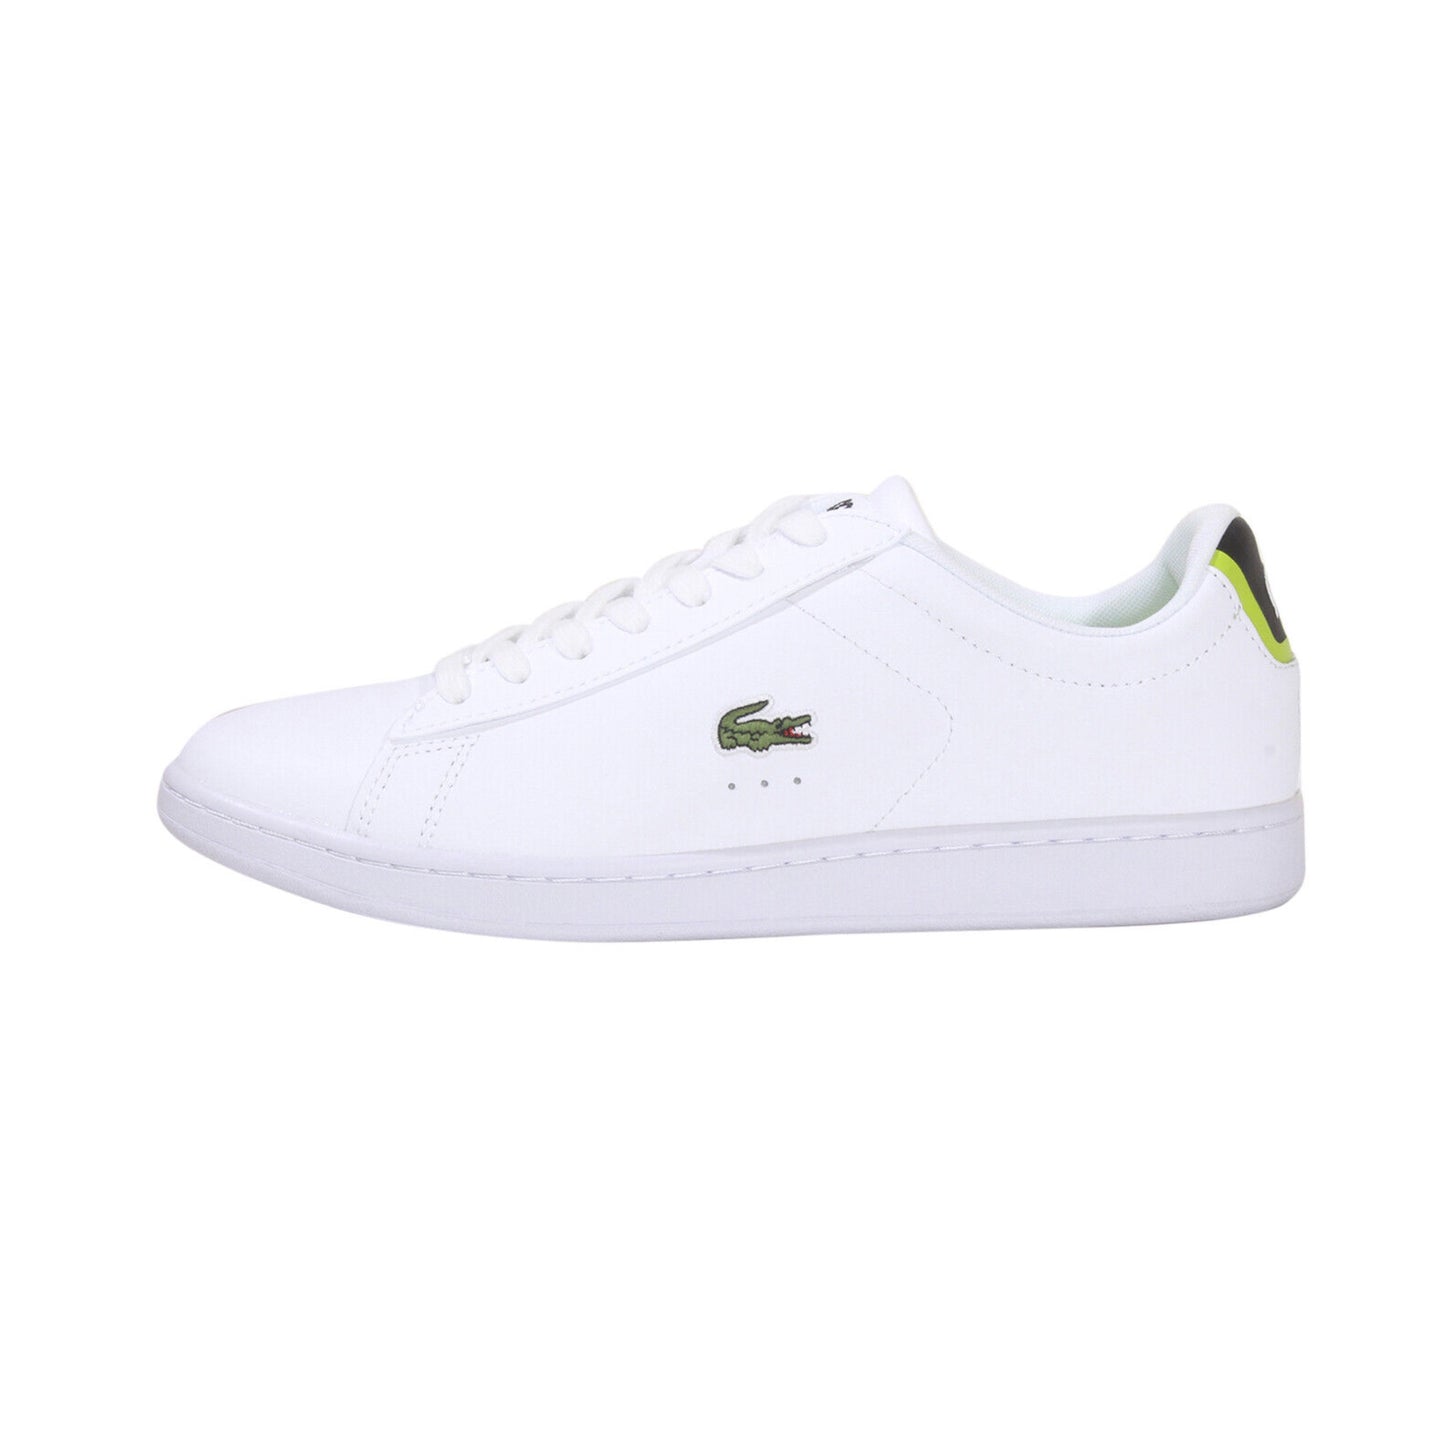 Carnaby Evo 222 White Blue By Lacoste